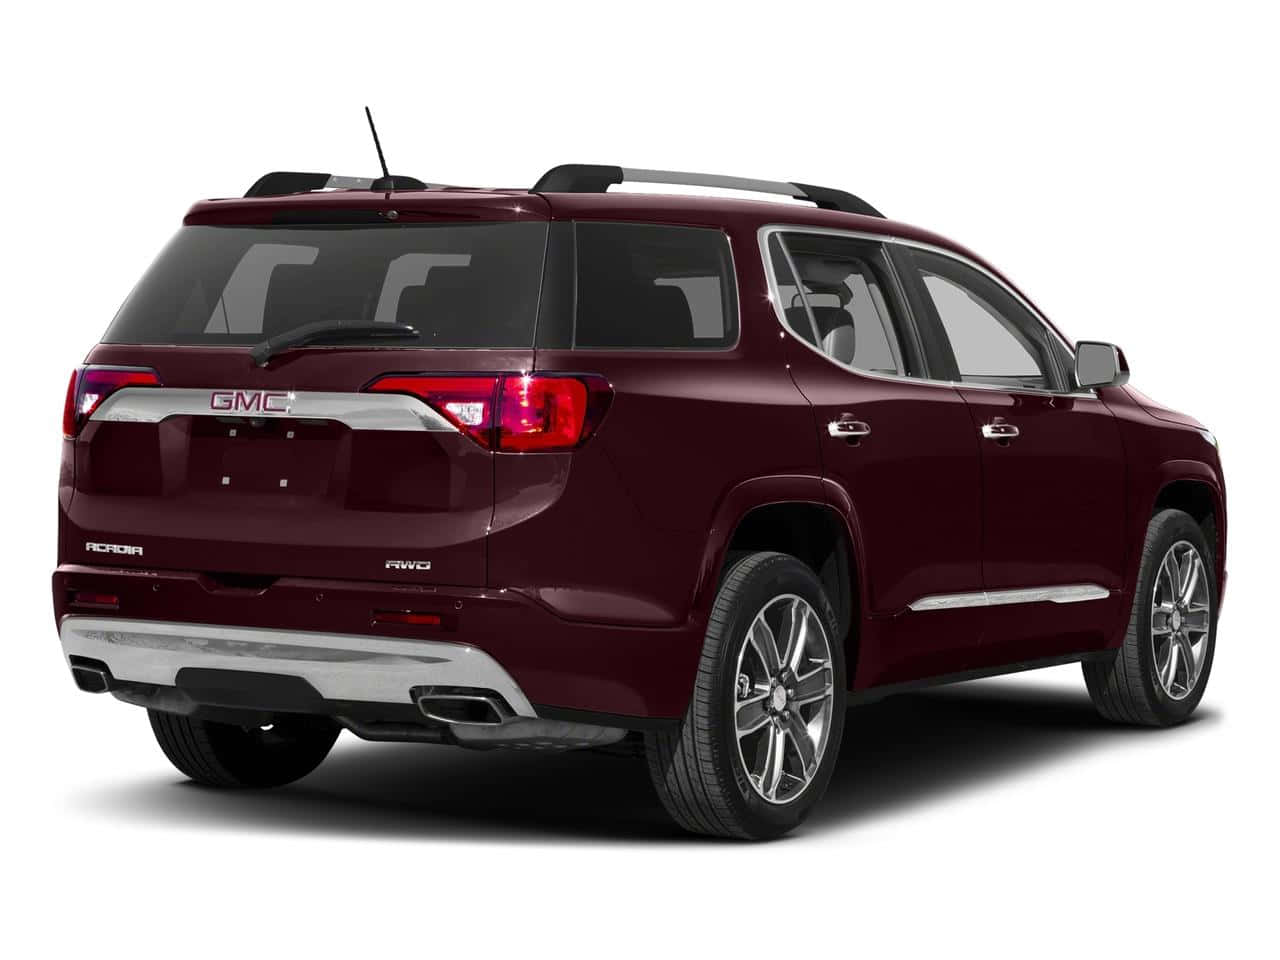 GMC Acadia Driving on a Sunny Day Wallpaper